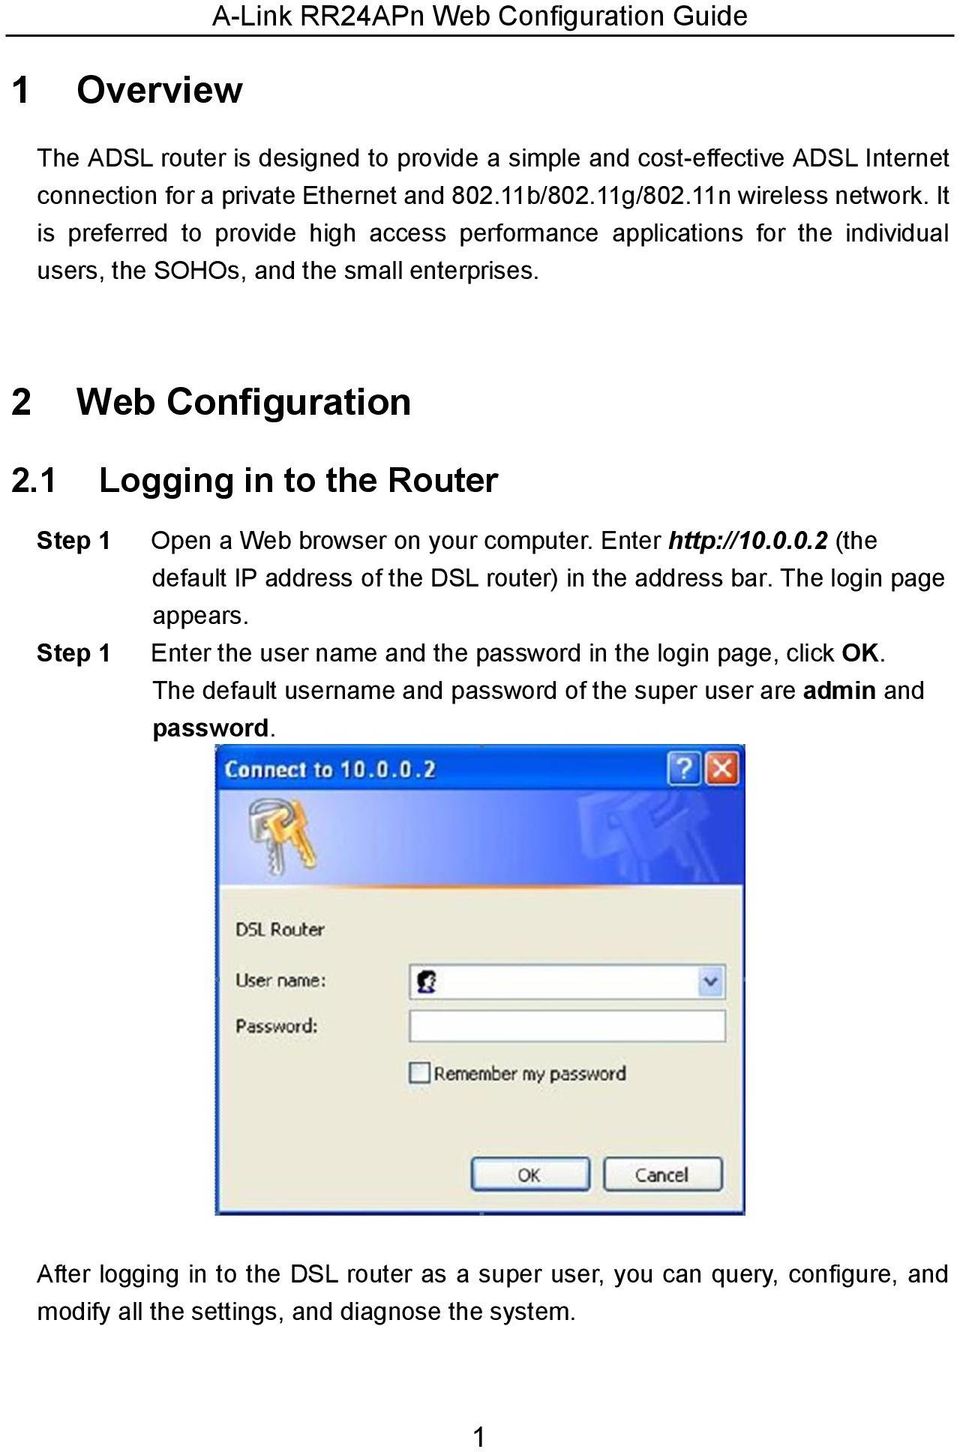 1 Logging in to the Router Step 1 Step 1 Open a Web browser on your computer. Enter http://10.0.0.2 (the default IP address of the DSL router) in the address bar. The login page appears.